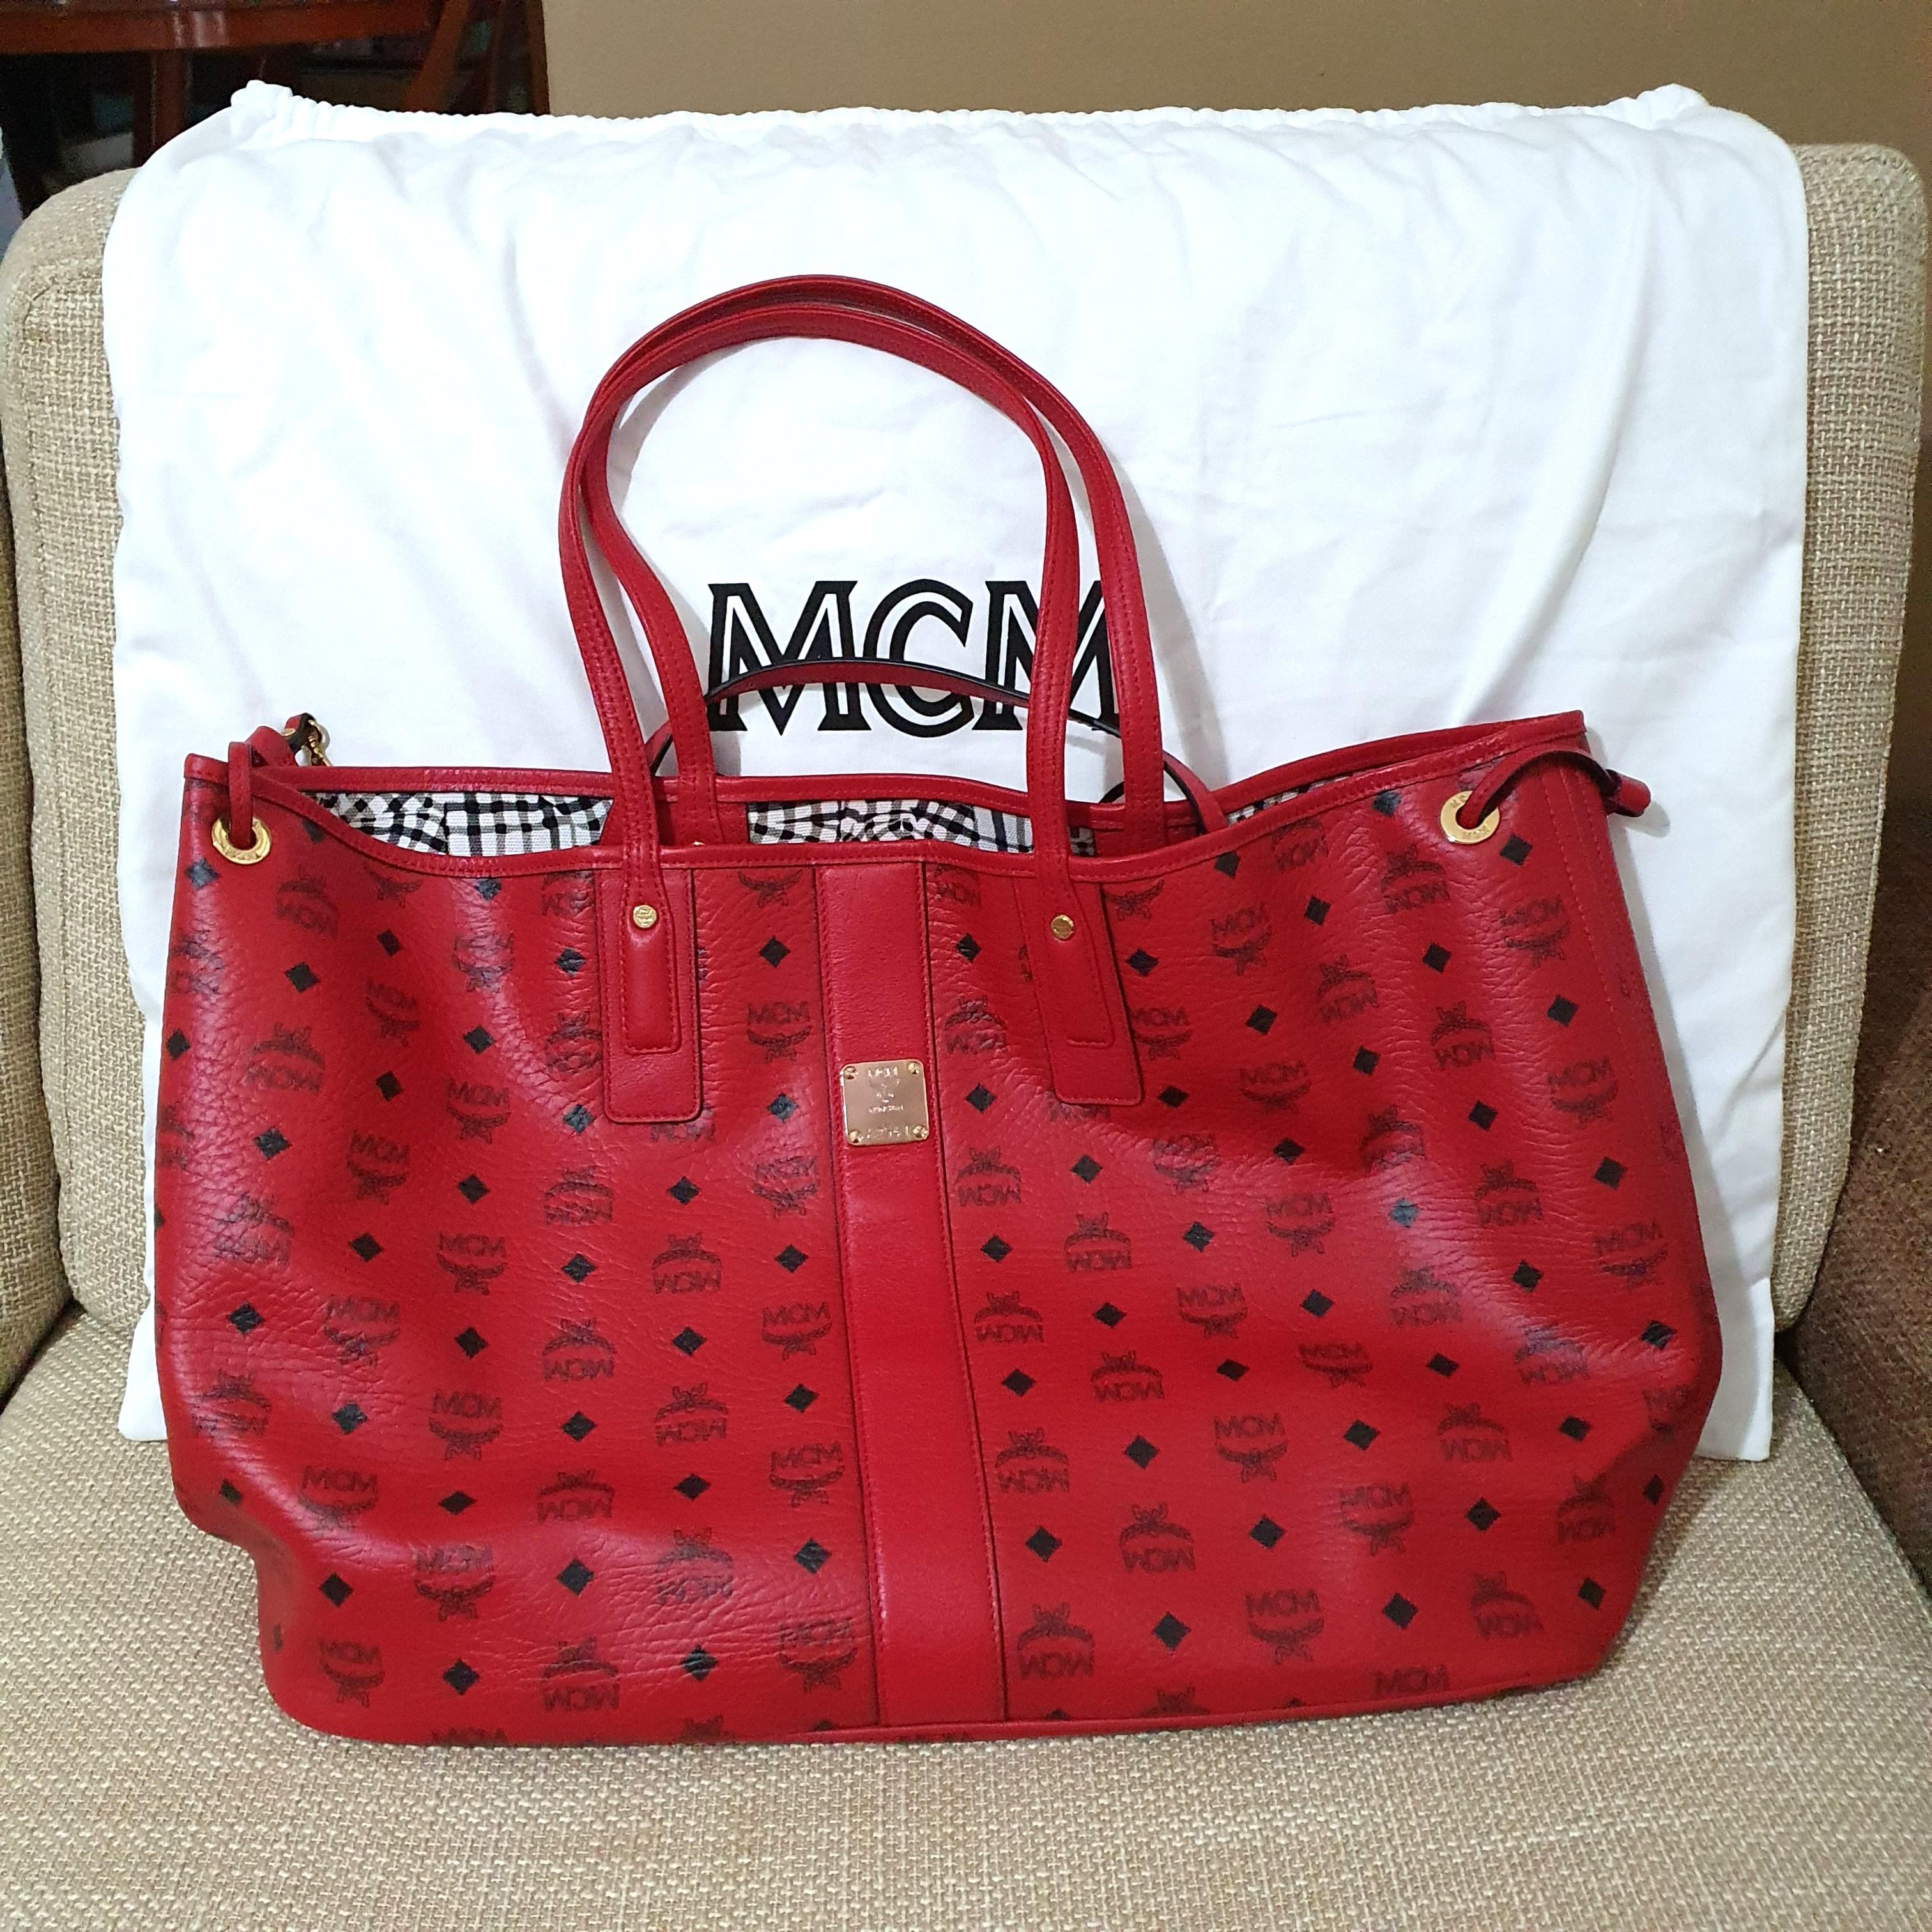 Buy MCM NEO MILLA TOTE IN PARK AVENUE LEATHER WHITE Online in Singapore